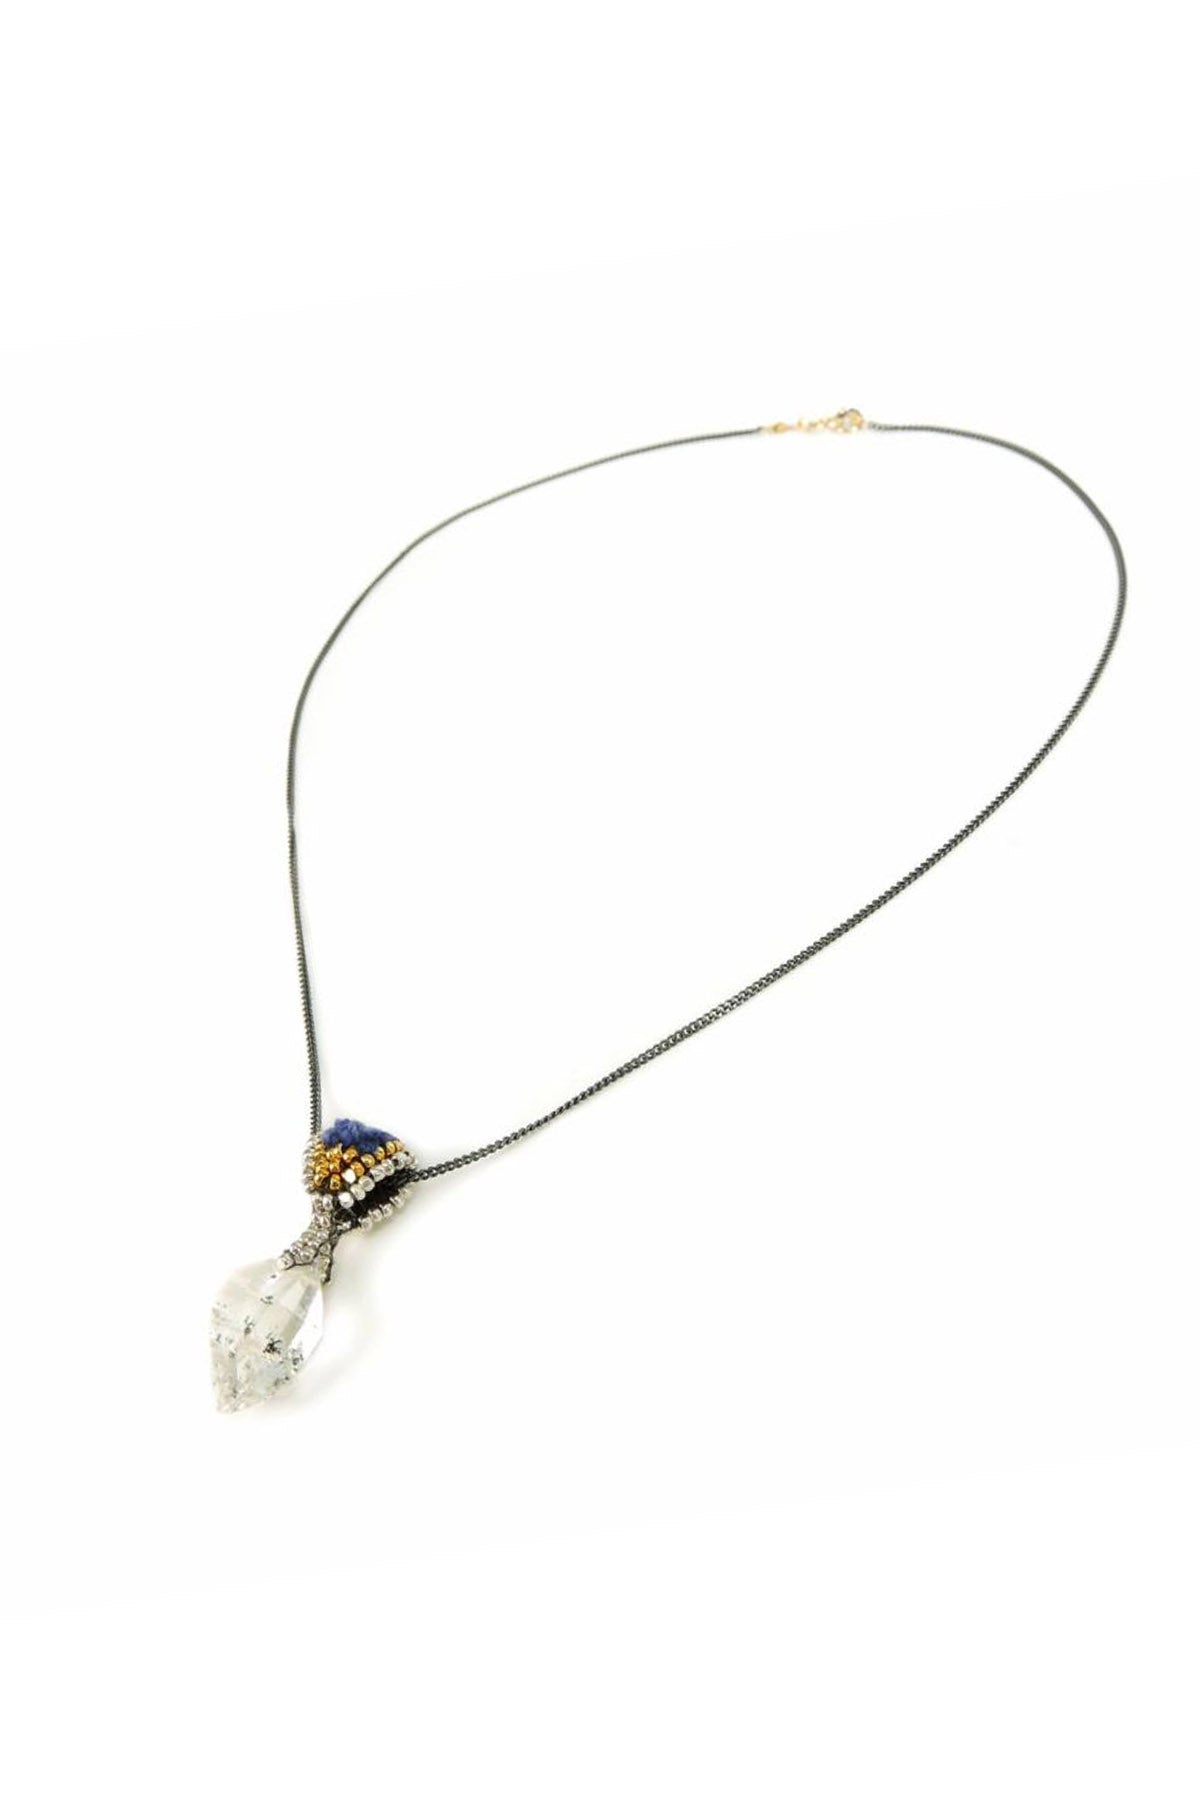 ISHI NECKLACE TRIANGLE HERKIMER BLUE BEADS - Y2021